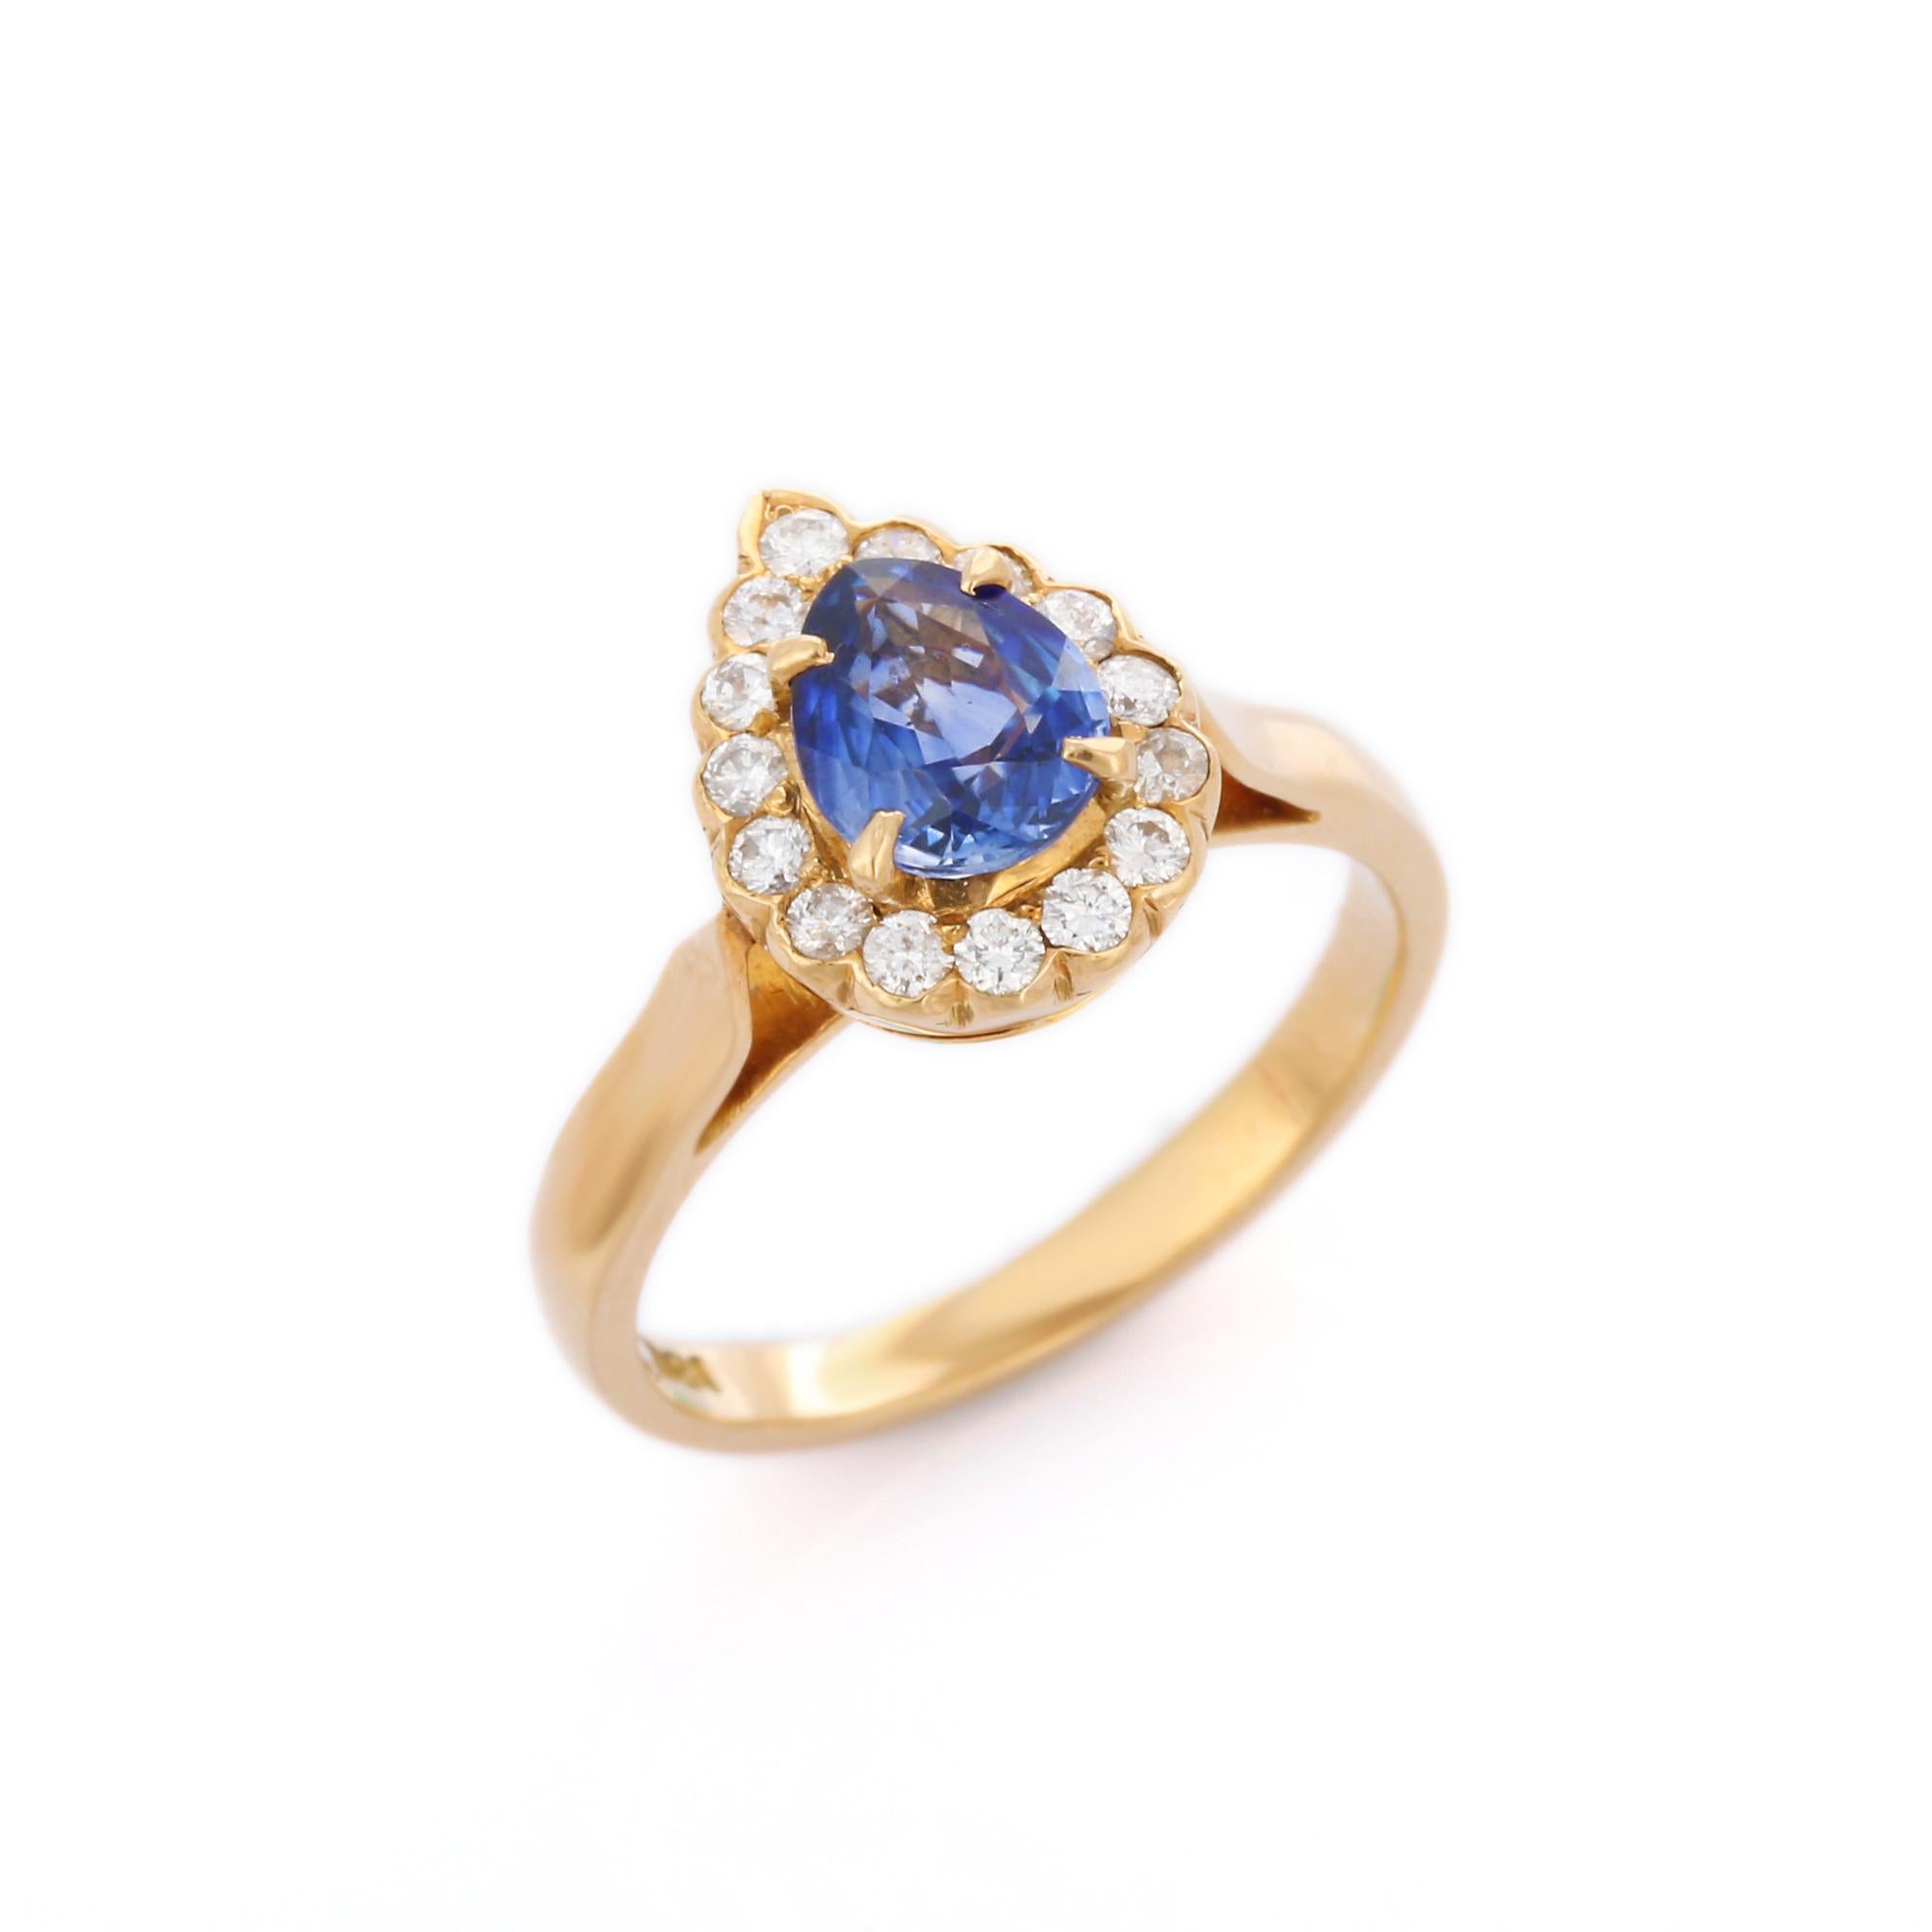 For Sale:  Pear Cut Blue Sapphire Ringed with Diamonds Engagement Ring in 18K Yellow Gold 5